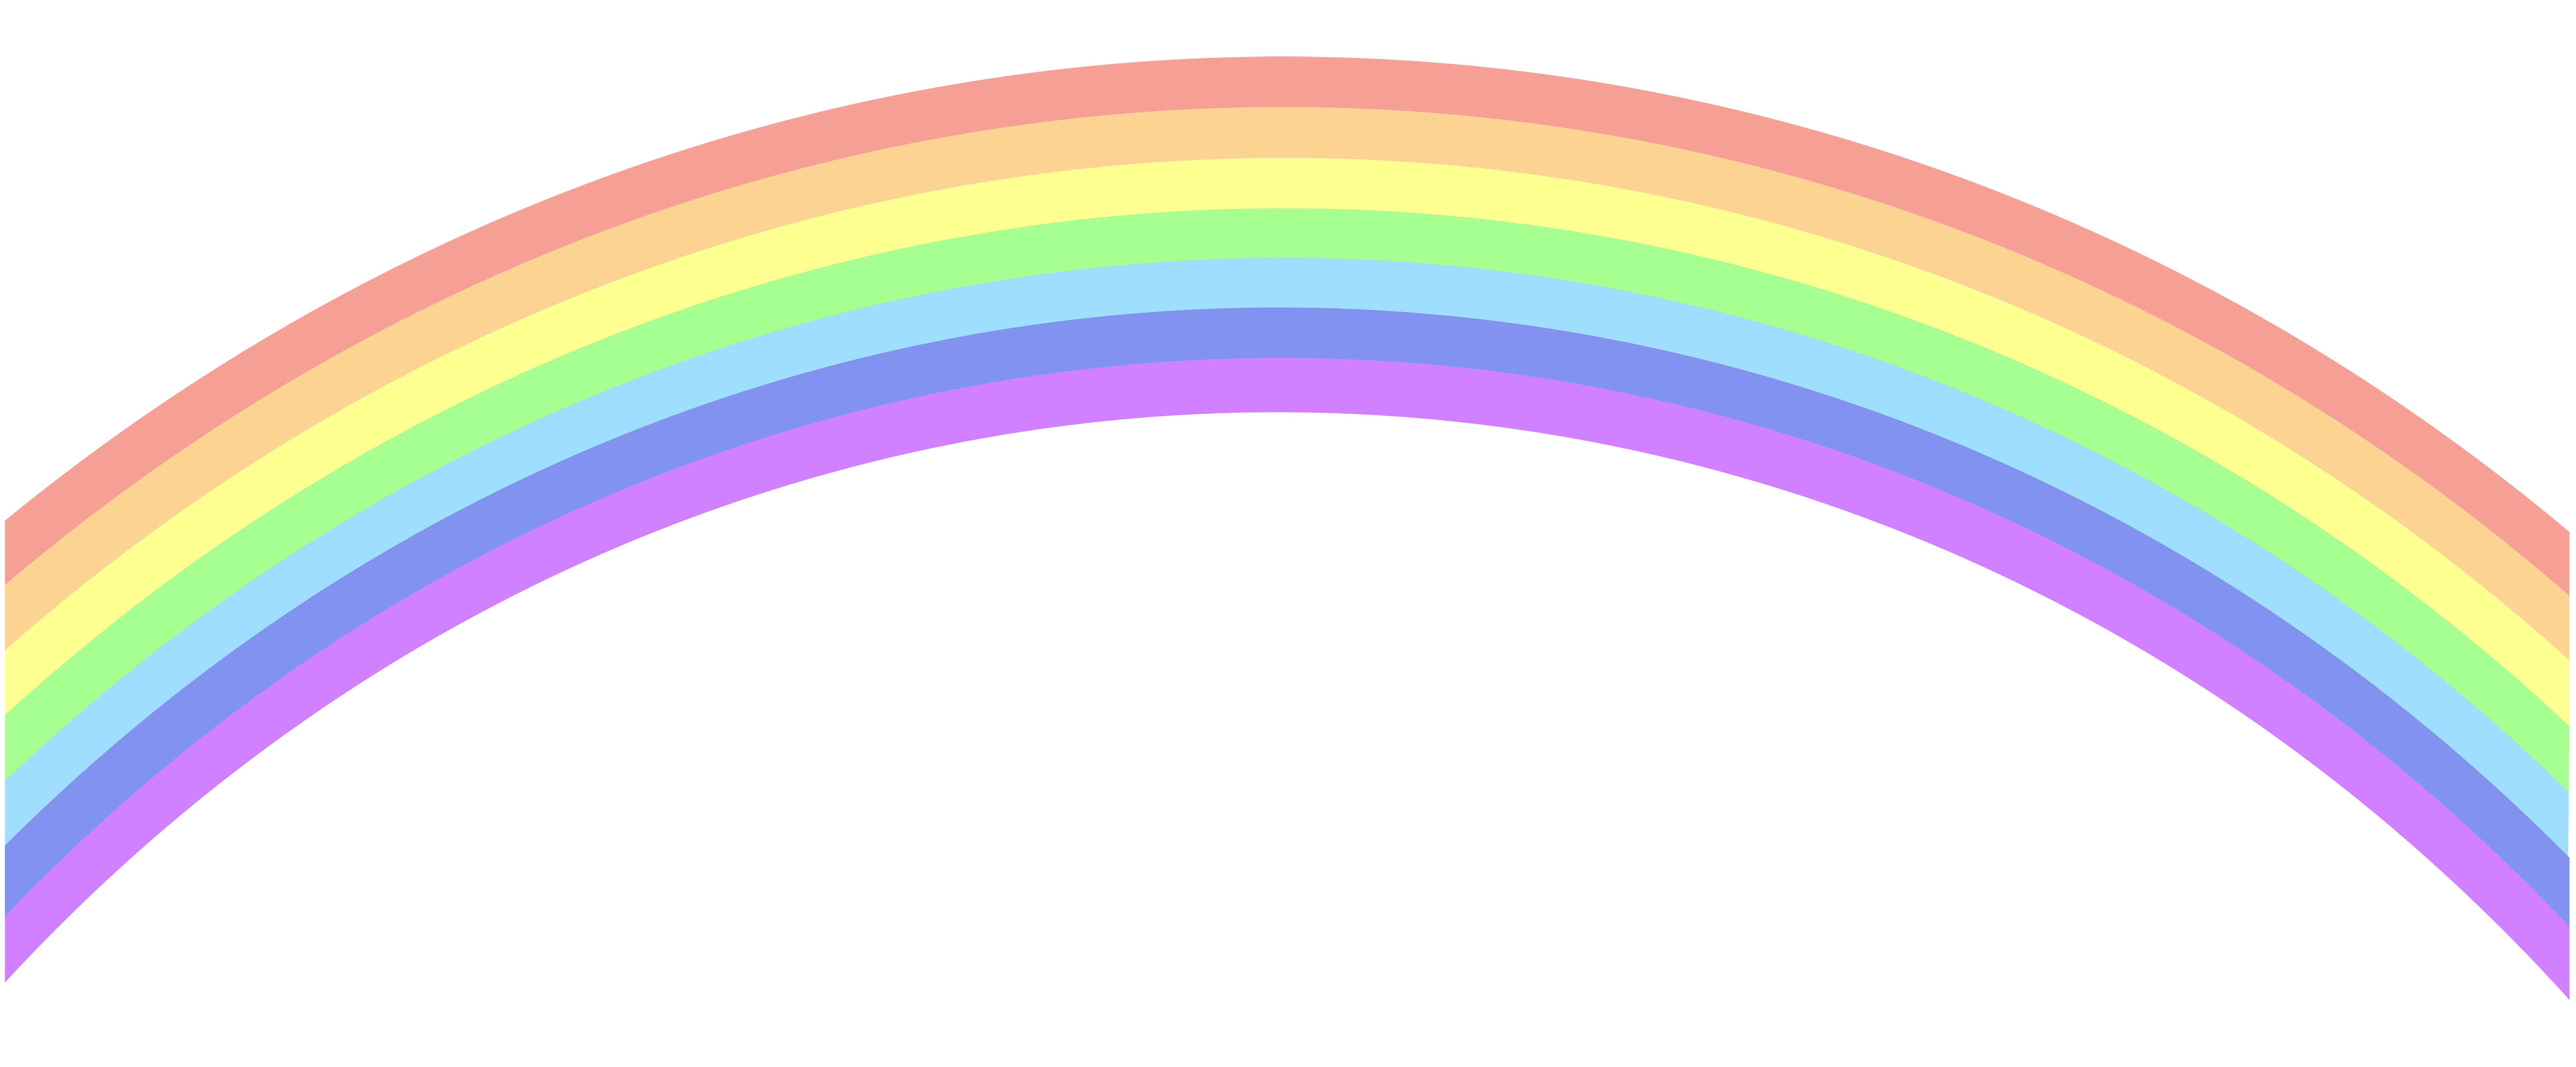 Rainbow Clip Art PNG Image | Gallery Yopriceville - High-Quality ...